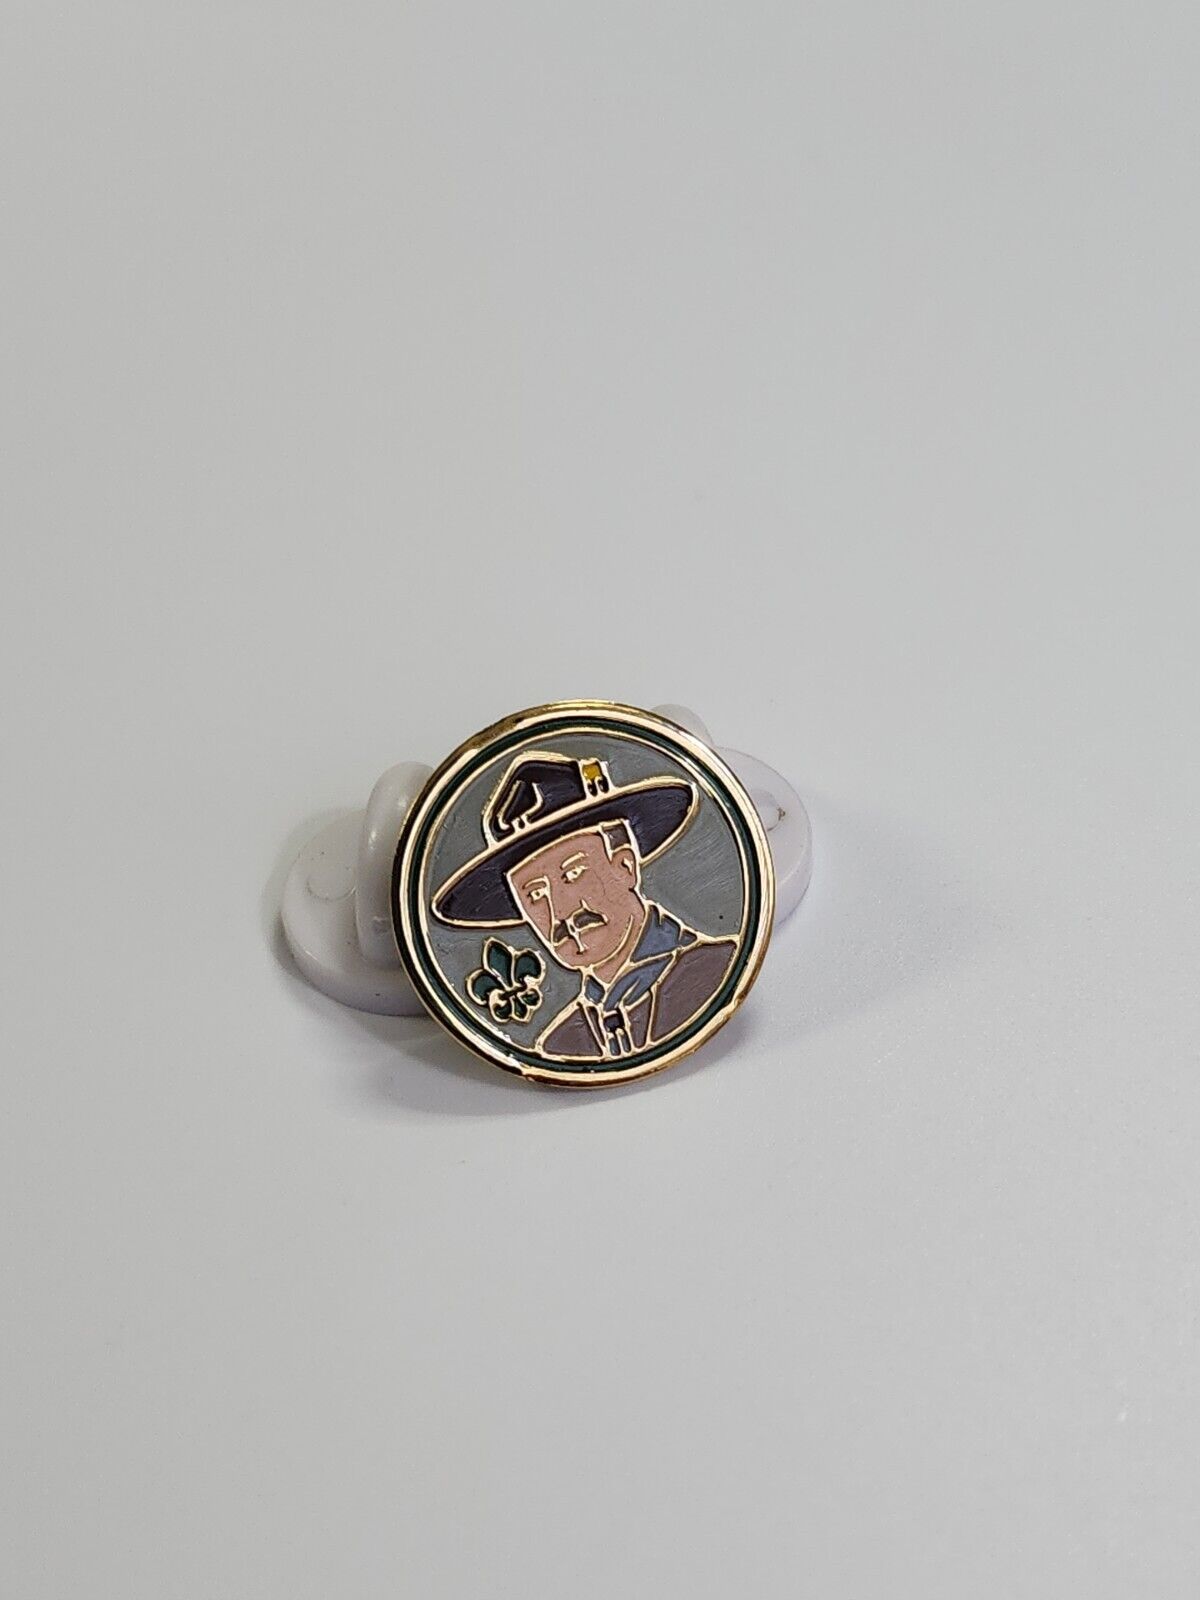 Lord Robert Baden-Powell Lapel Pin Boy Scouts Small Size 